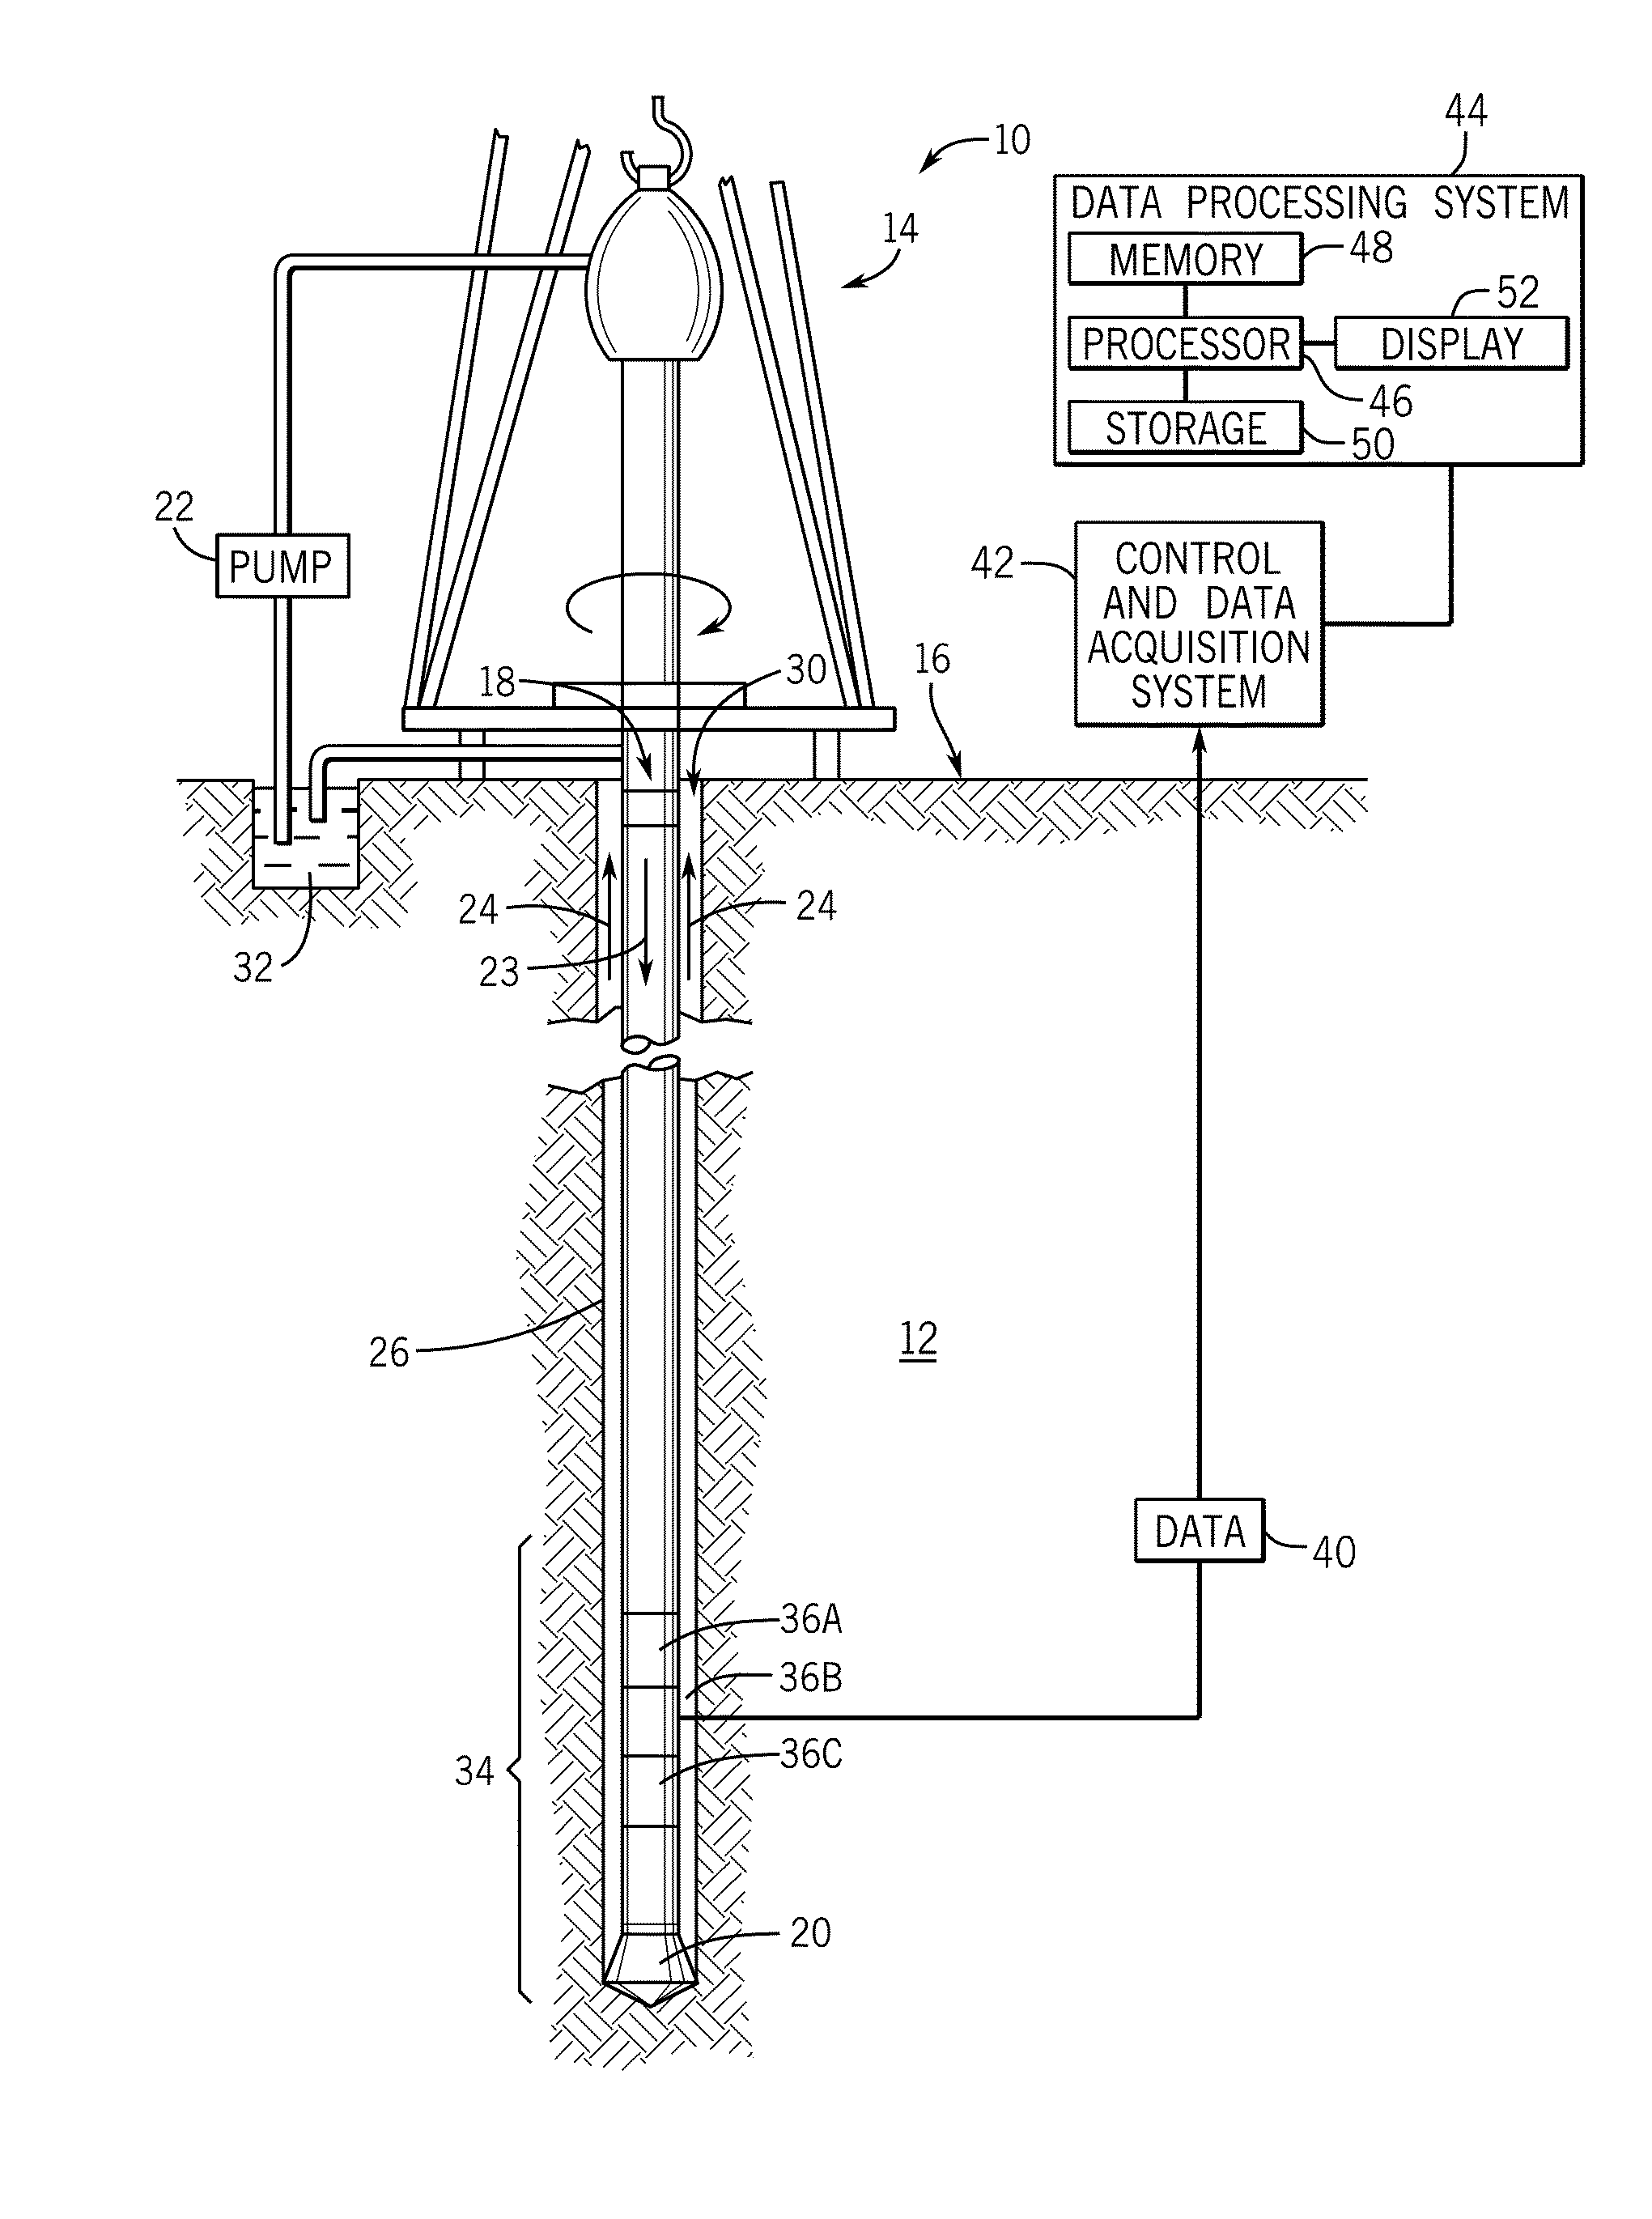 Systems and Methods for Determining Dielectric Constant or Resistivity from Electromagnetic Propagation Measurement Using Contraction Mapping